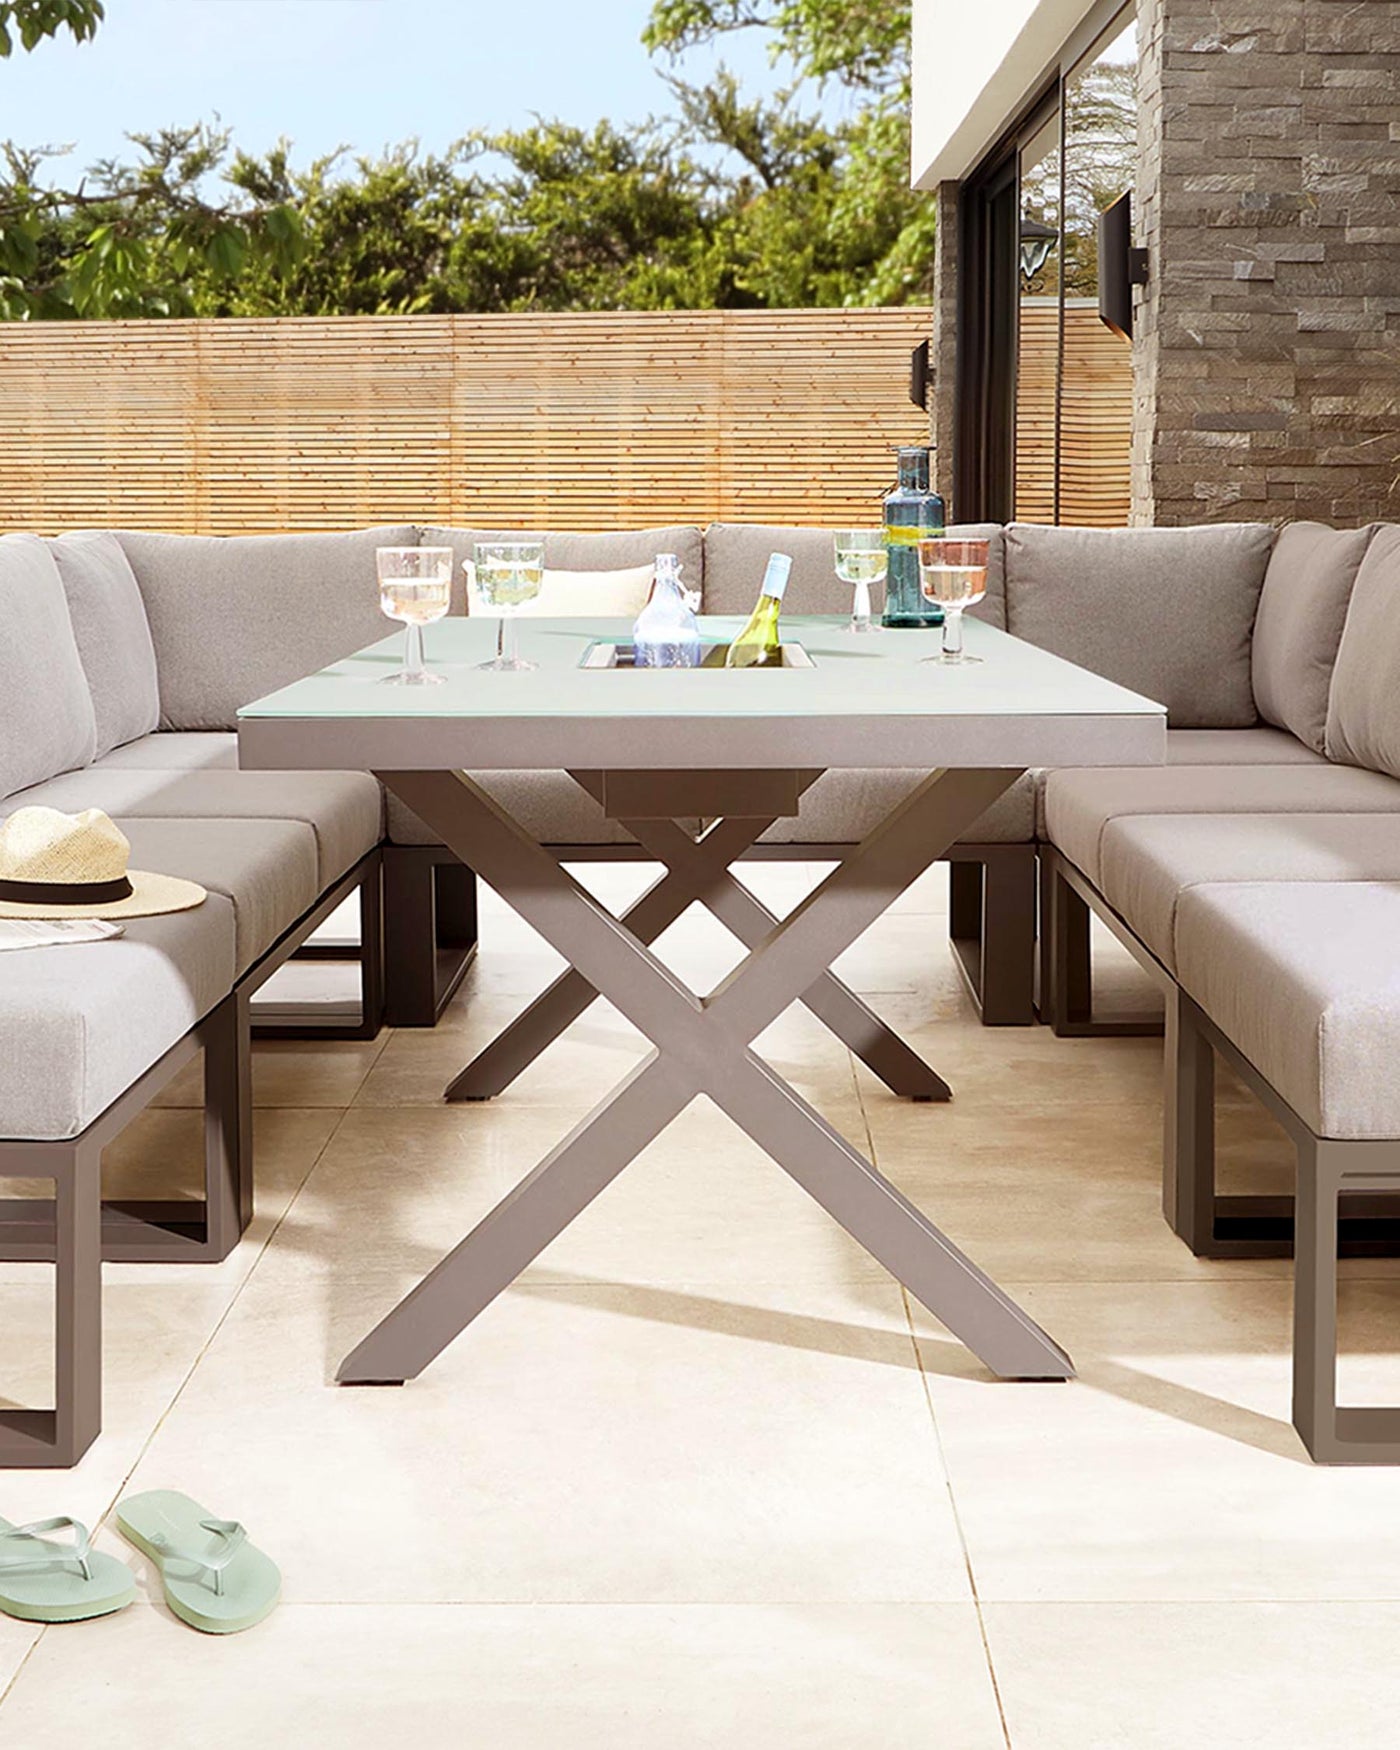 Modern outdoor patio furniture set featuring a taupe-coloured rectangular dining table with a frosted glass top and a unique crisscross base design, complemented by an L-shaped corner sofa with plush seat and back cushions in matching taupe tones. The setting is accented with a pair of wine glasses, a water pitcher, and a blue bottle, suggesting a relaxing alfresco dining experience.